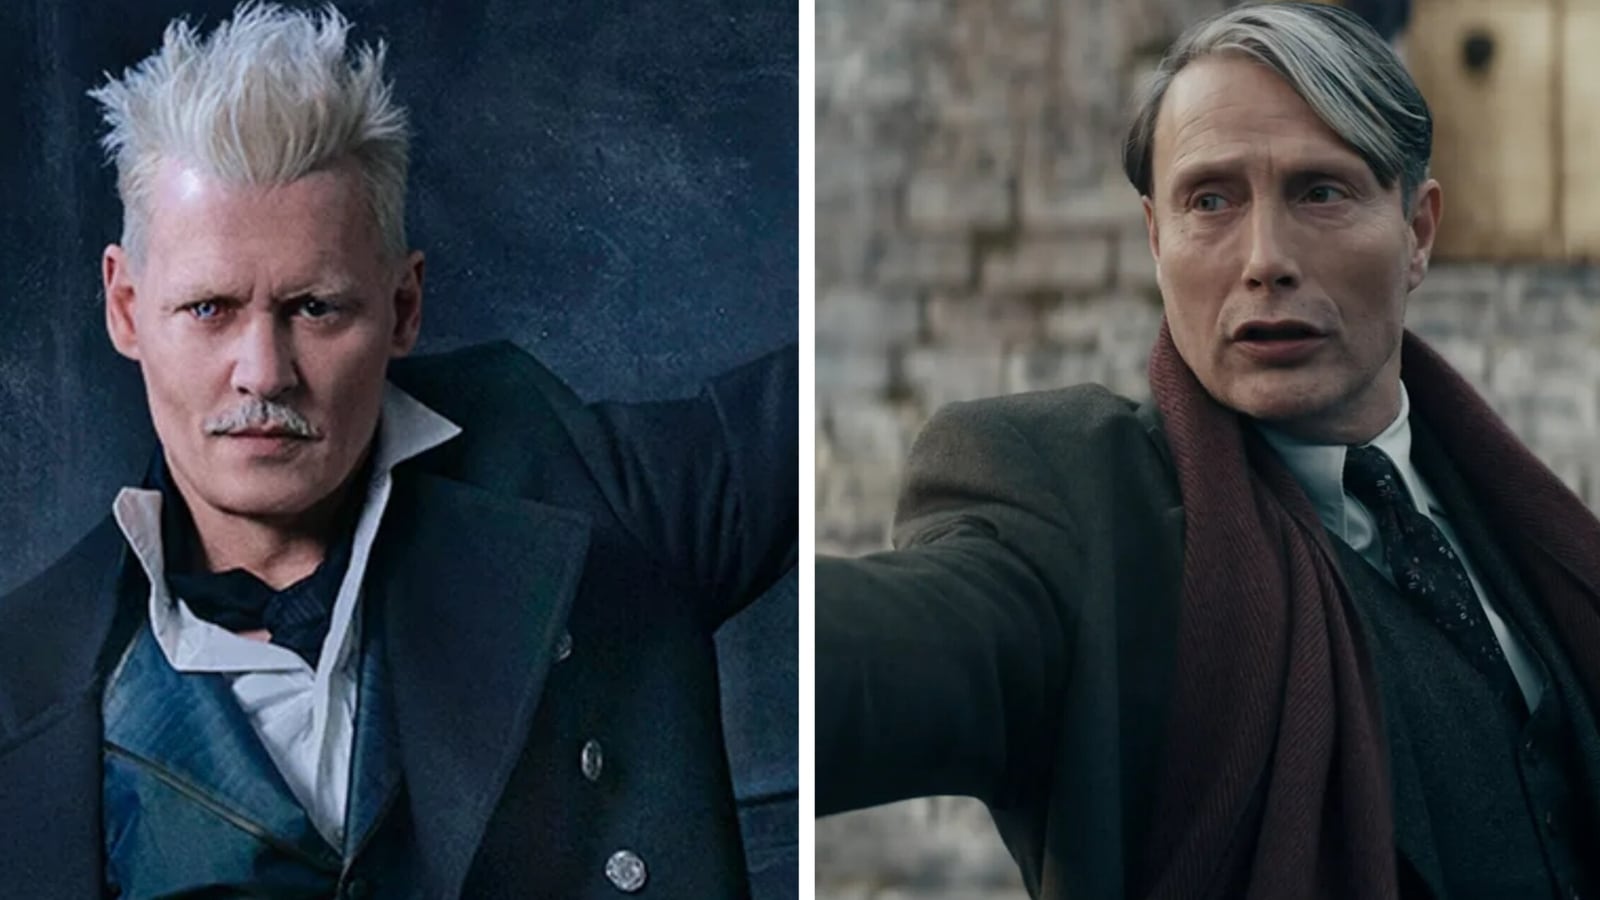 Johnny Depp might return to Fantastic Beasts, says Mads Mikkelsen, who replaced him in Harry Potter spinoff franchise